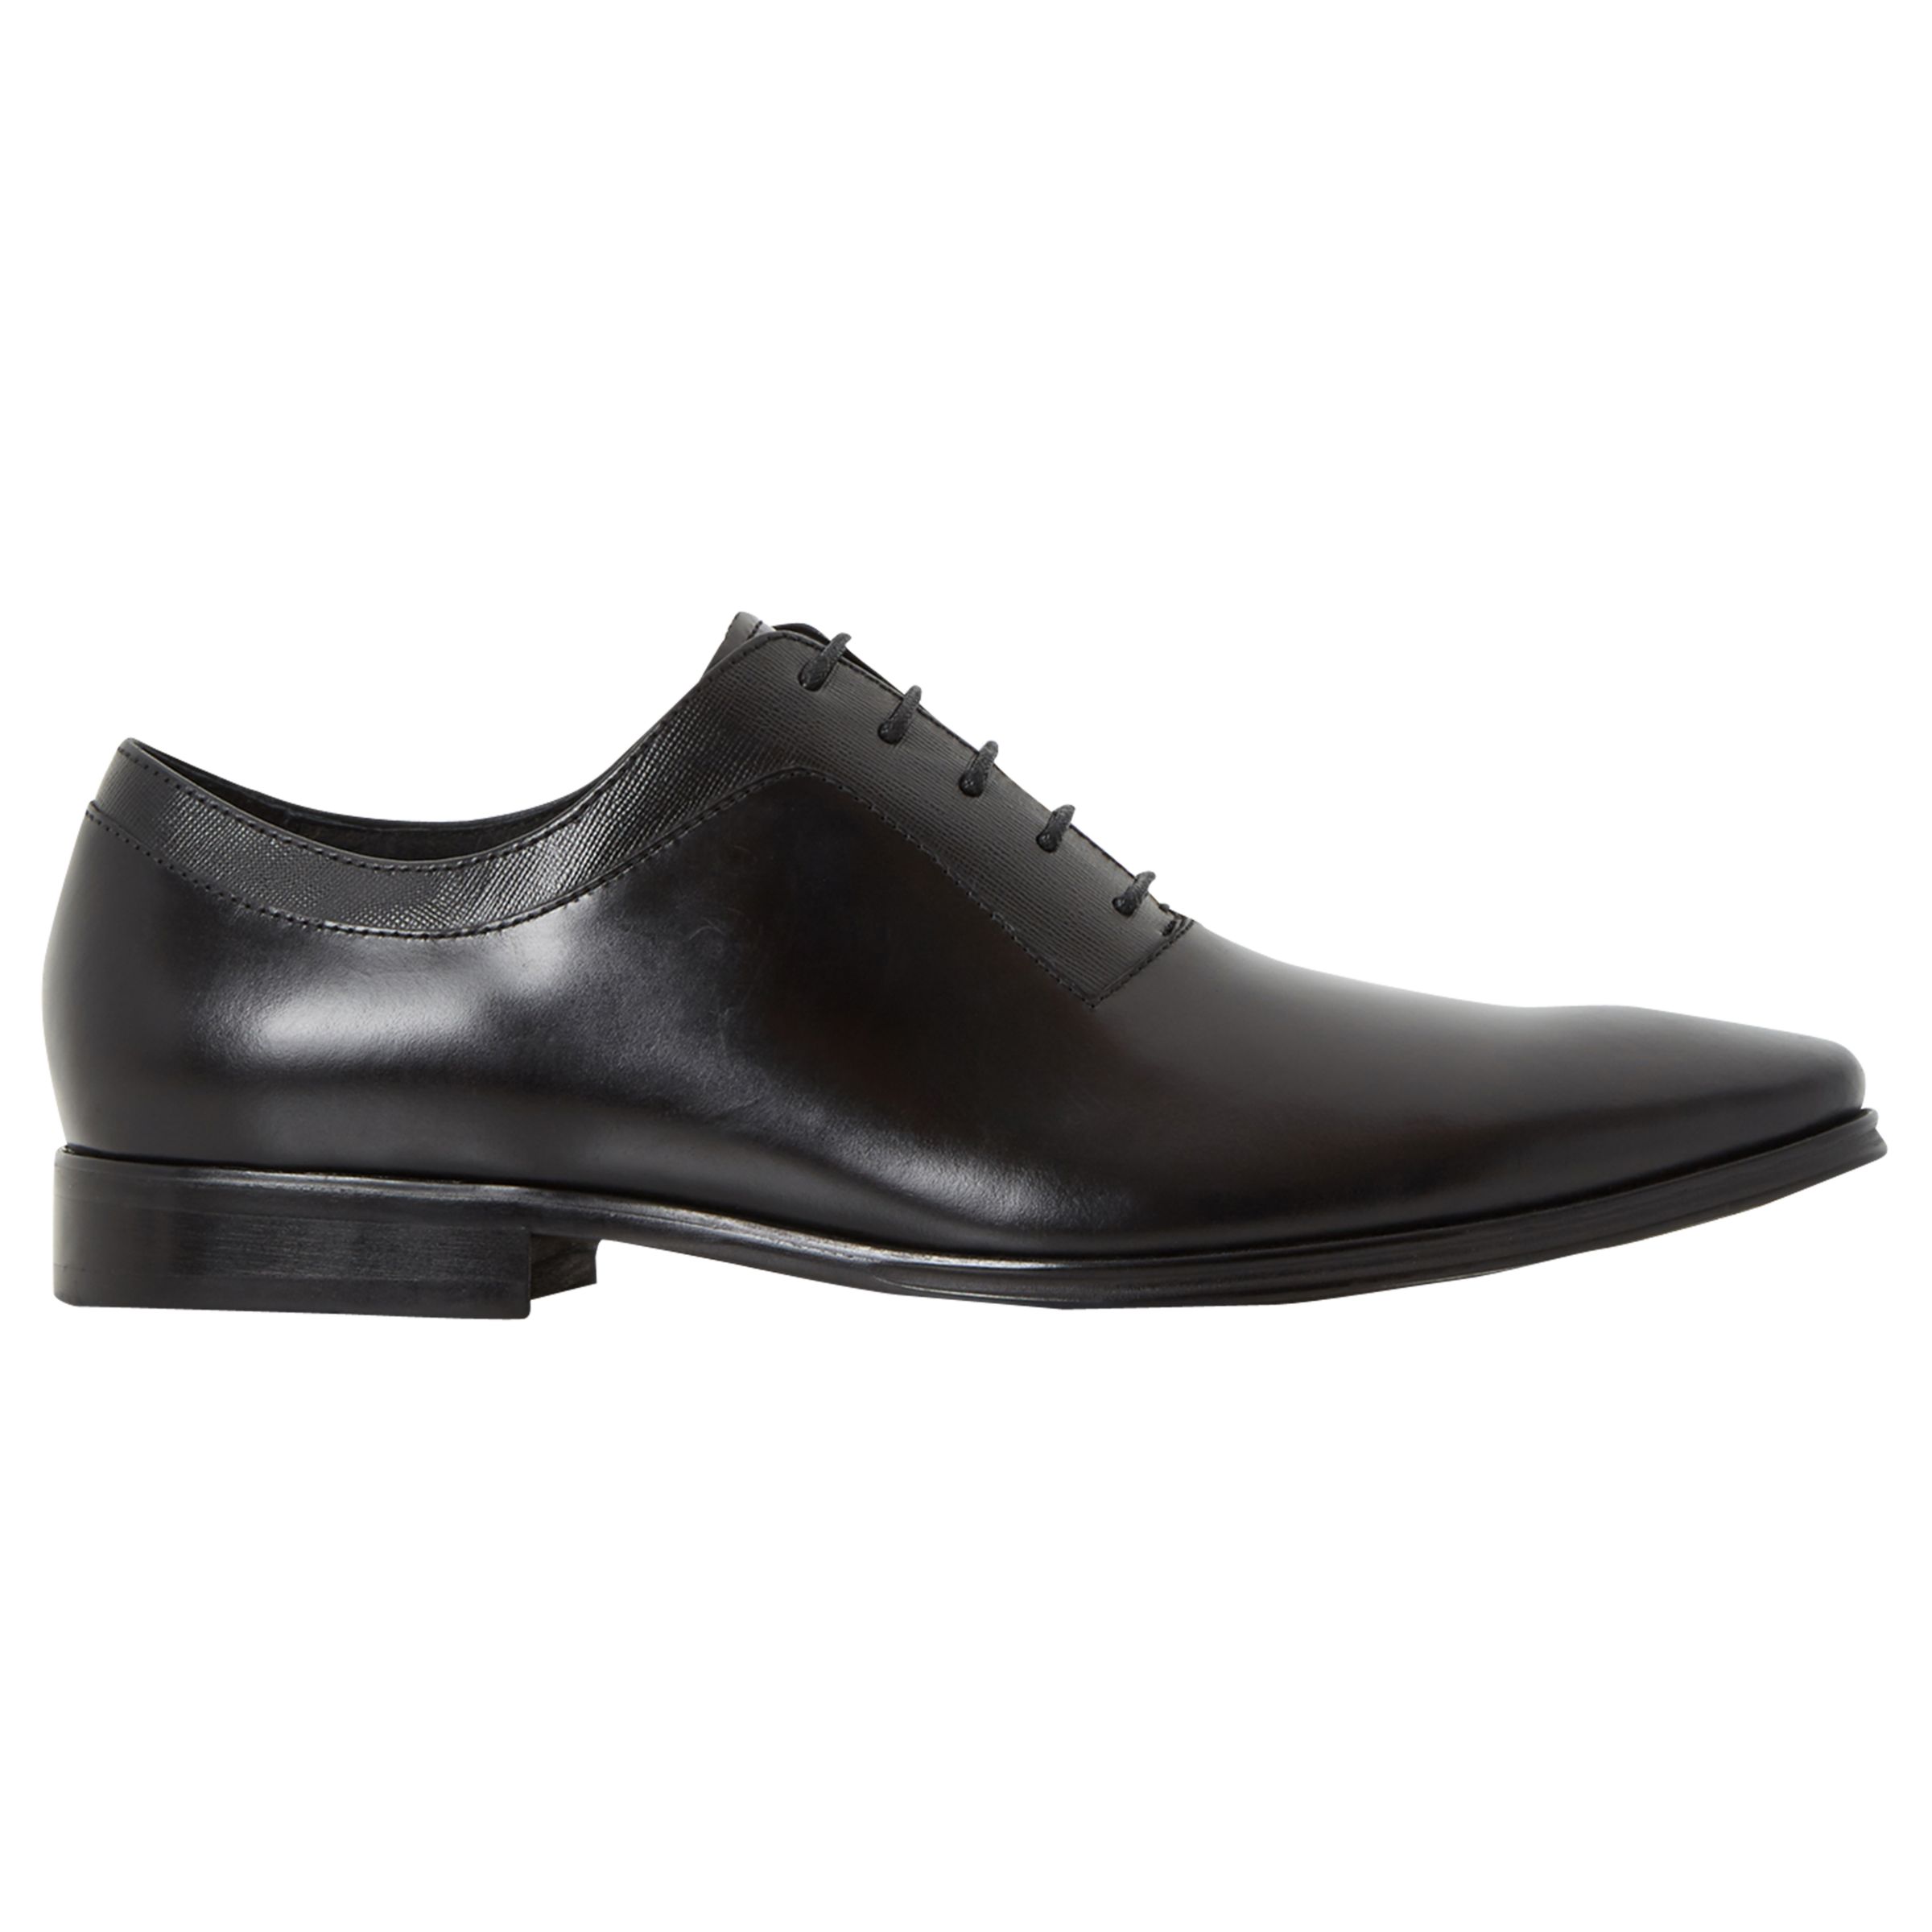 Dune Rancho Oxford Shoes at John Lewis & Partners